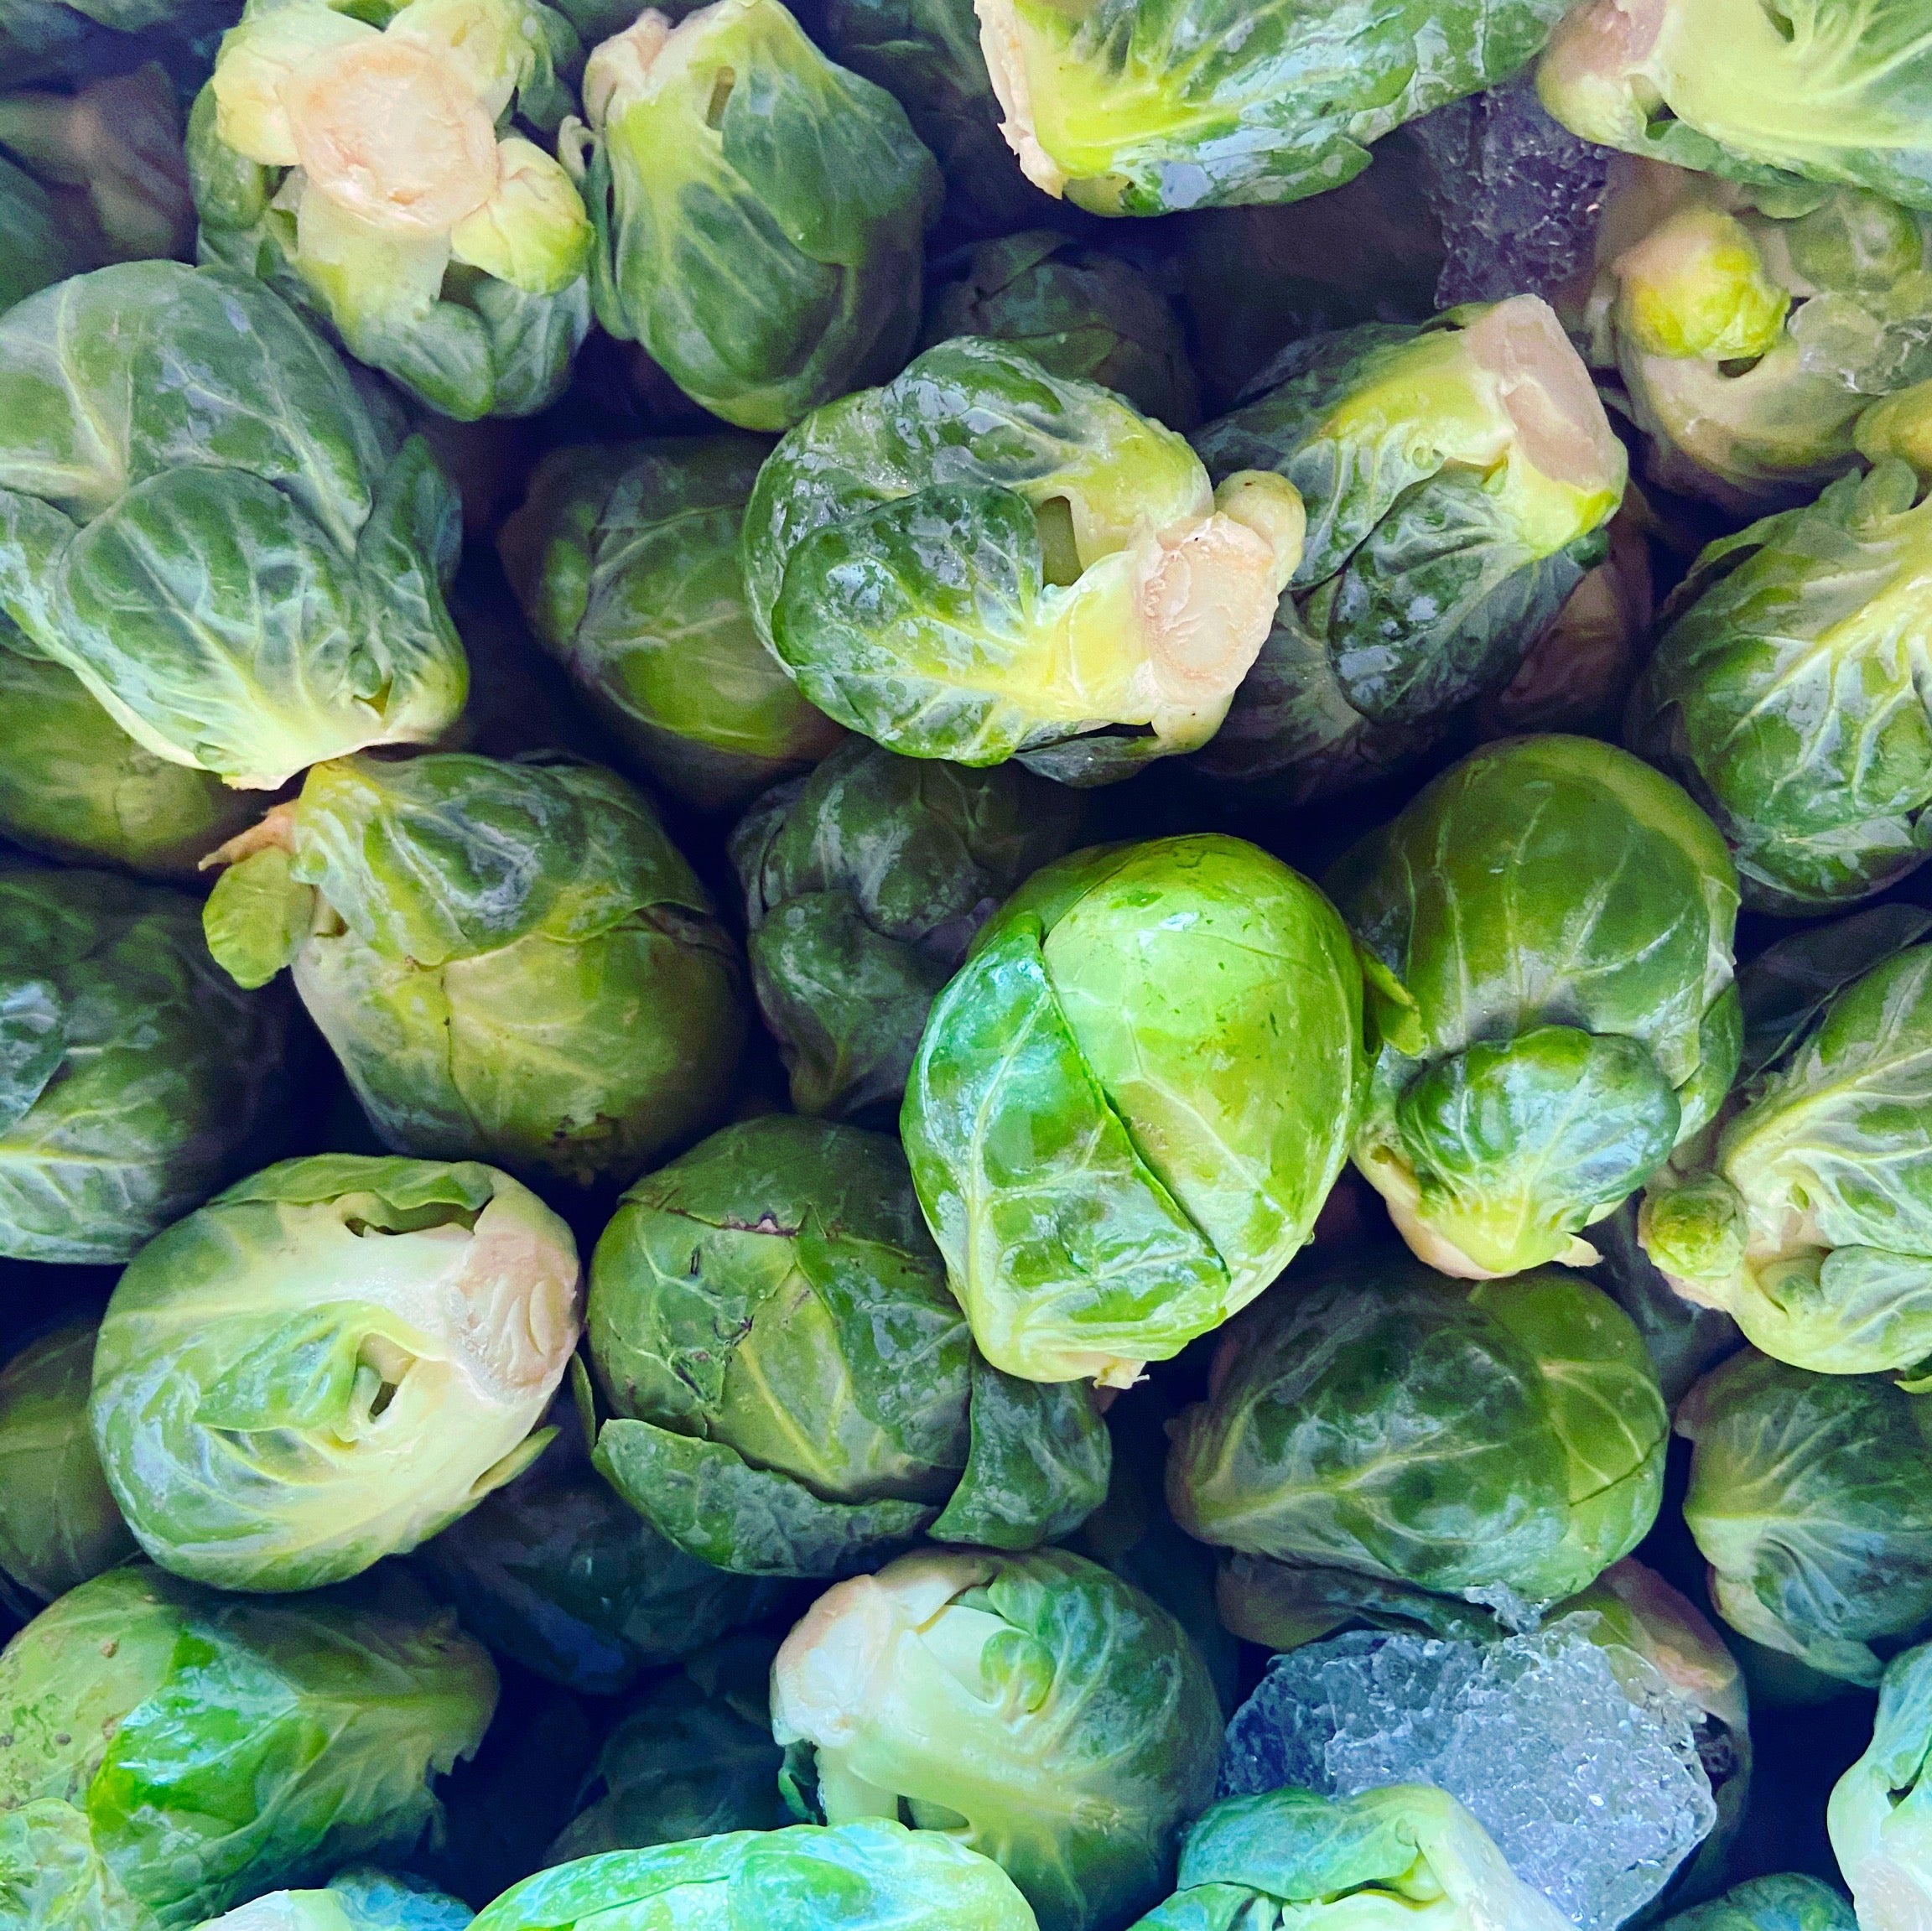 Brussel Sprouts - The Farm Shop Toowoomba